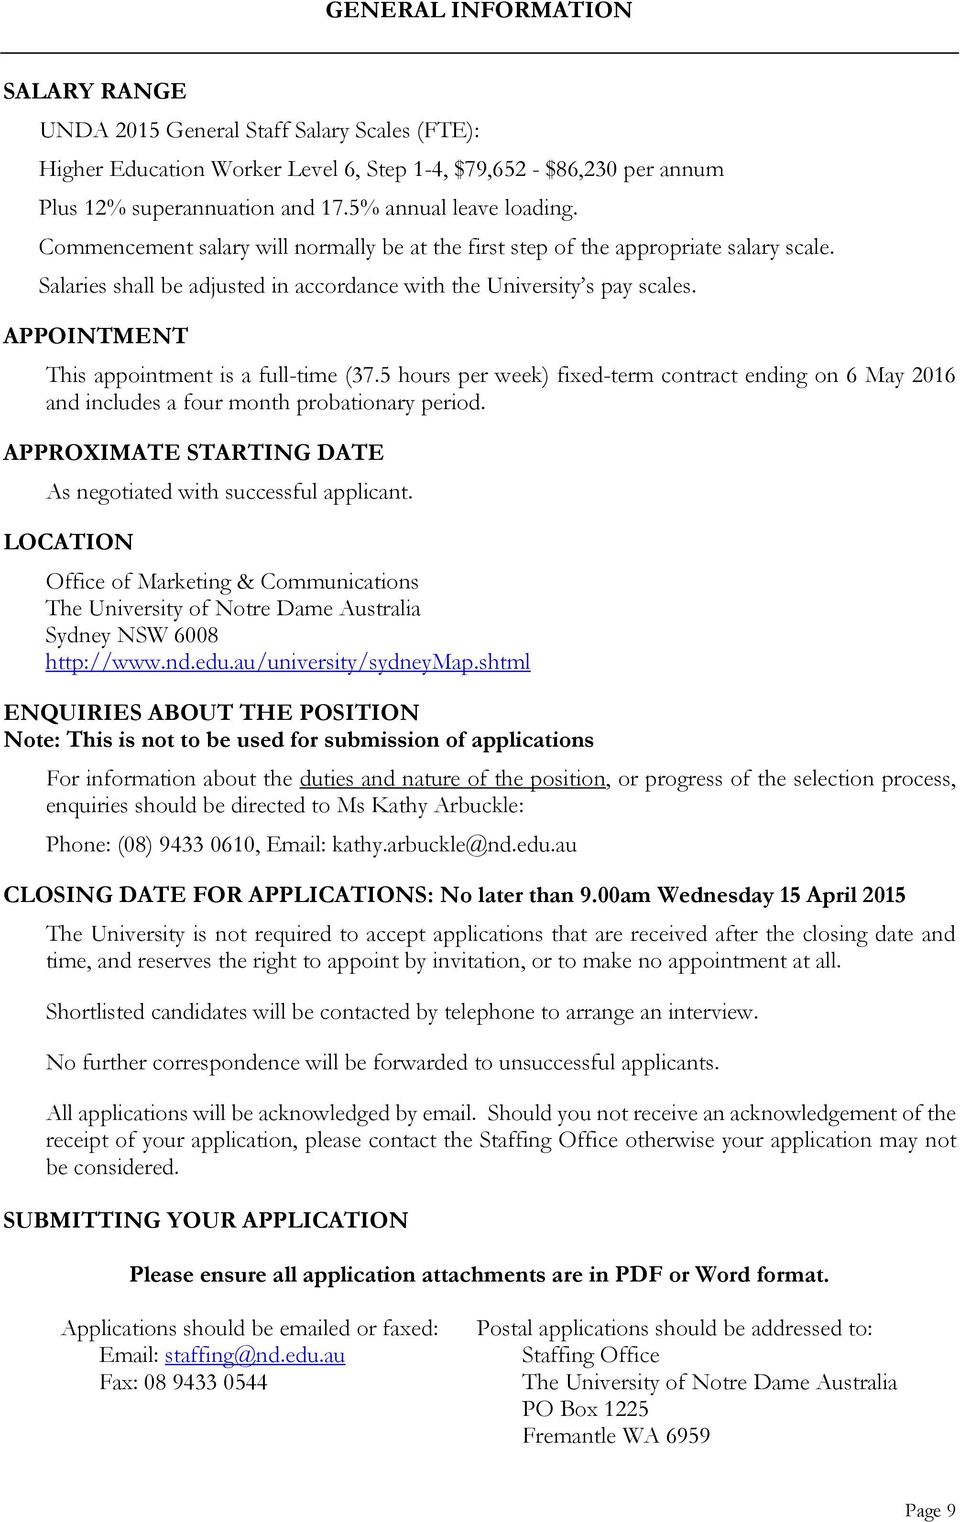 APPOINTMENT This appointment is a full-time (37.5 hours per week) fixed-term contract ending on 6 May 2016 and includes a four month probationary period.